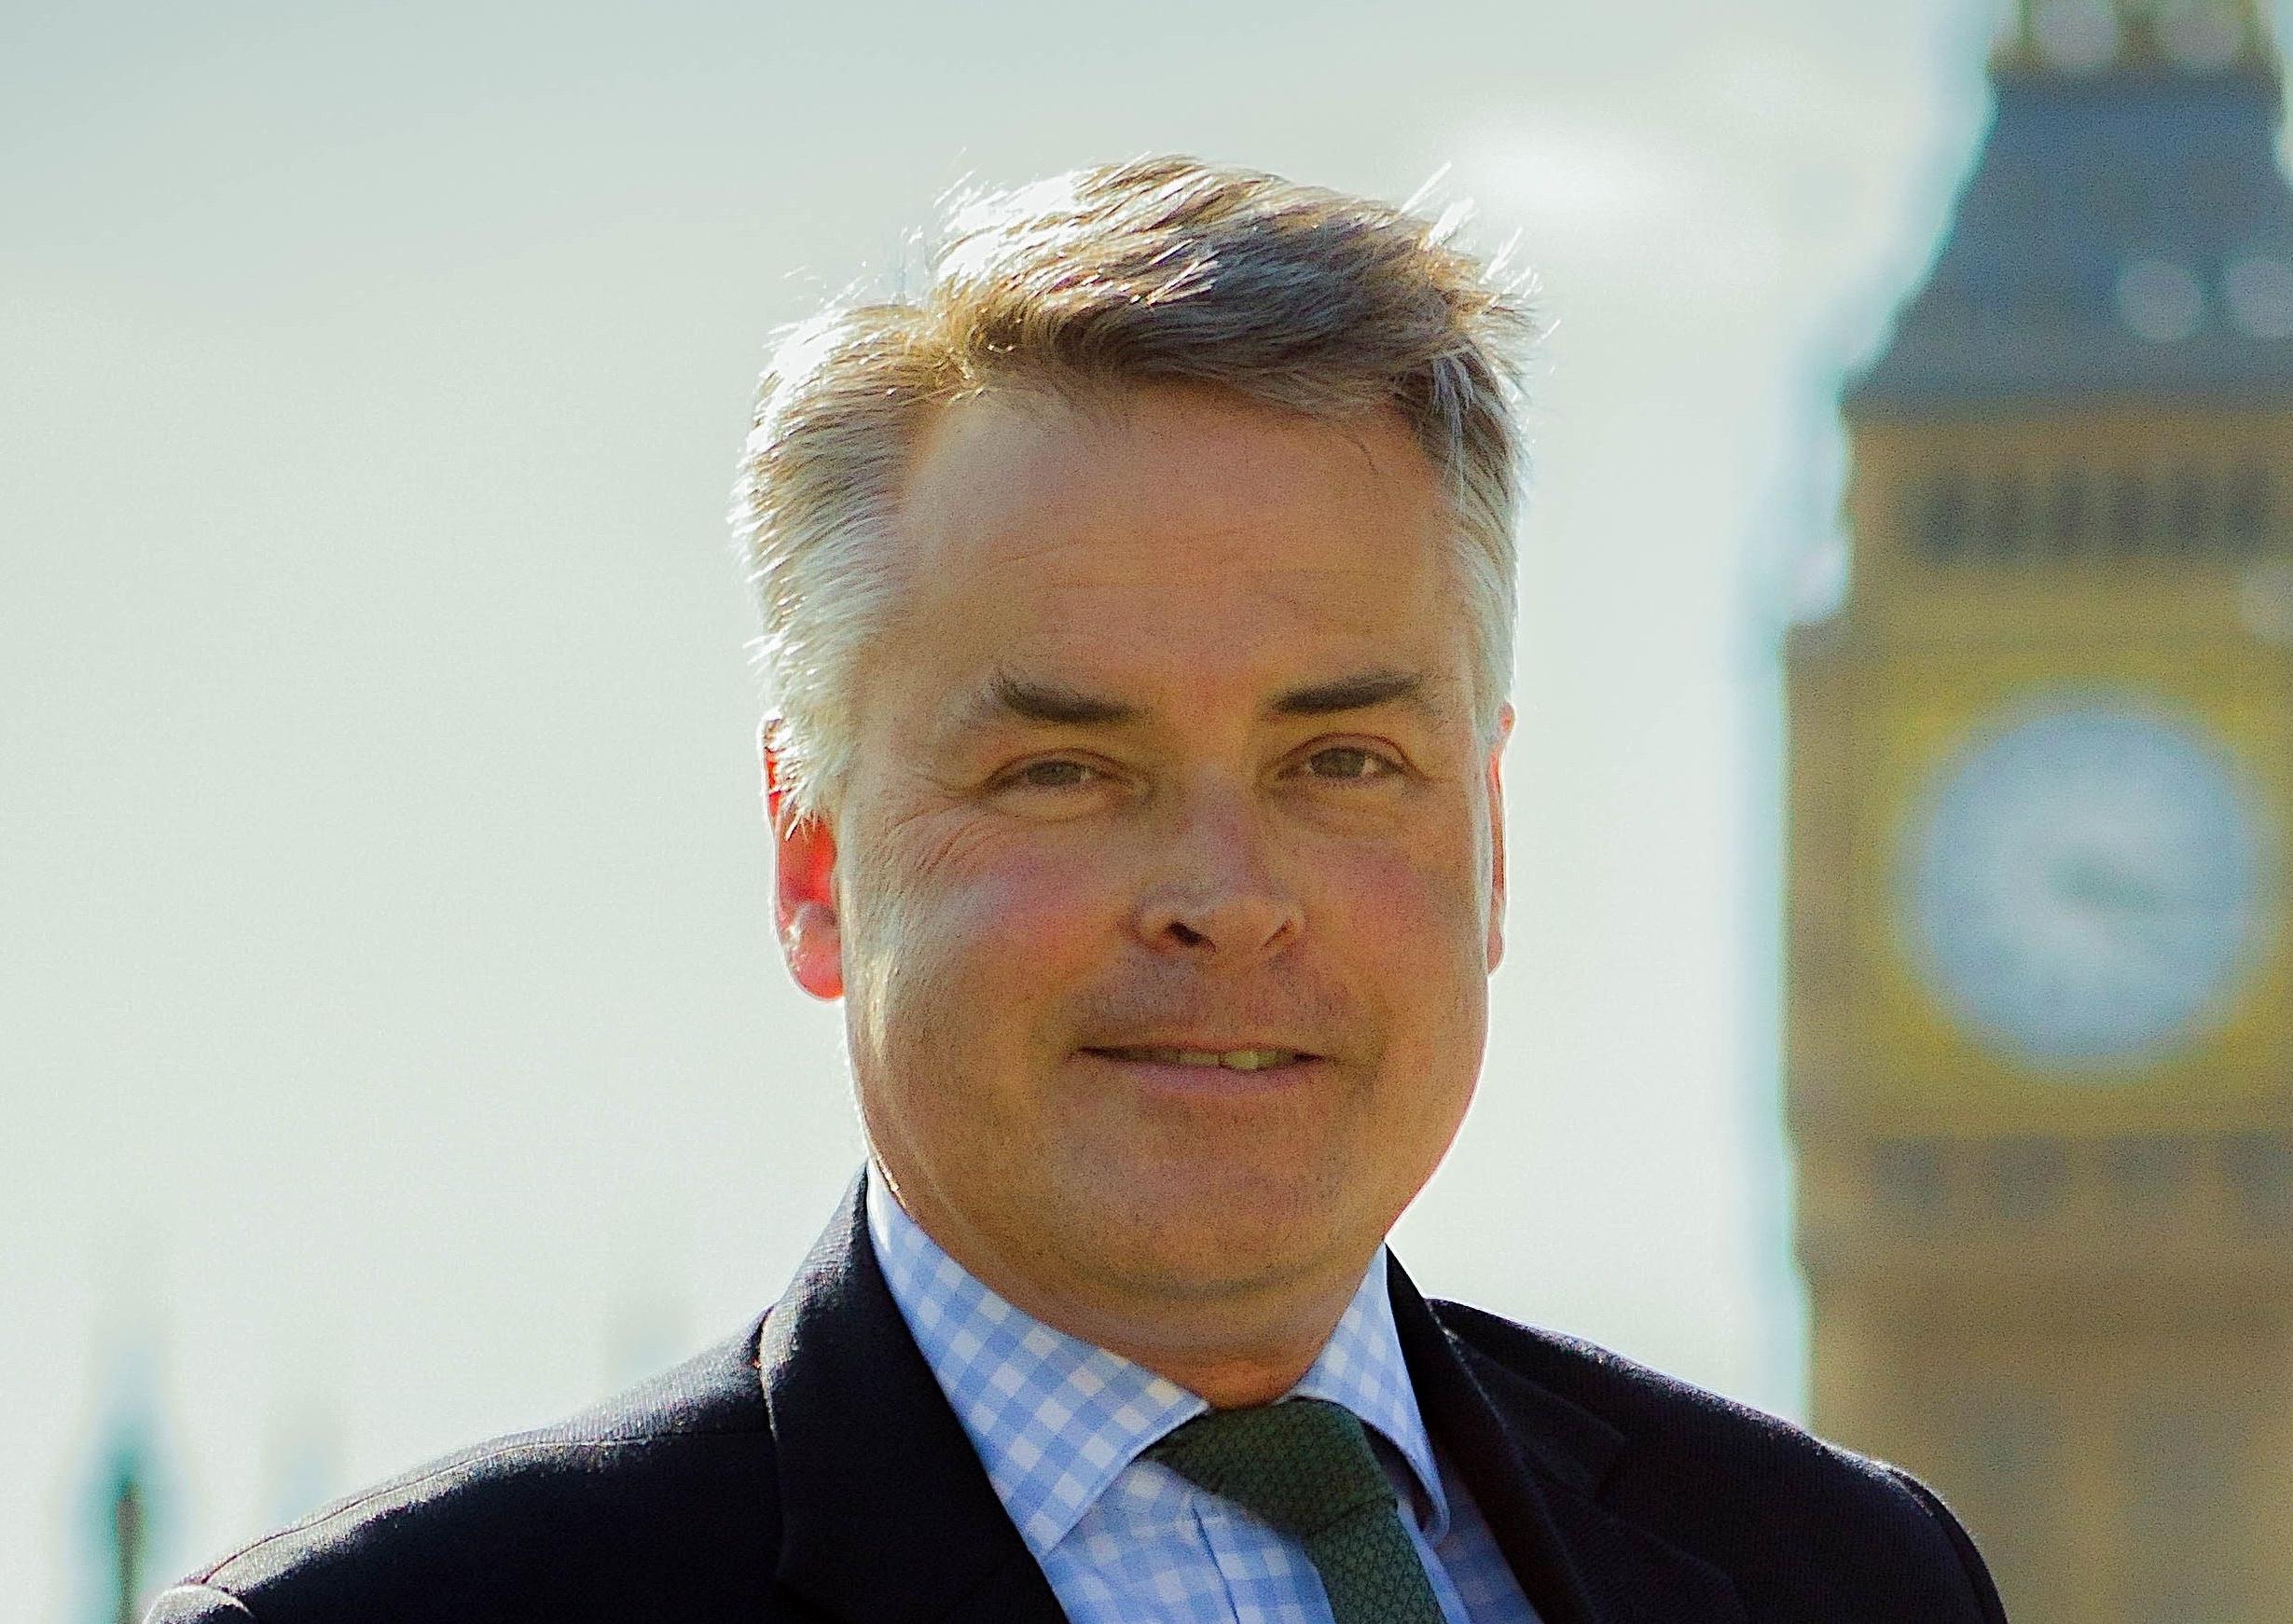 Conservative Tim Loughton has been re-elected MP for East Worthing and Shoreham